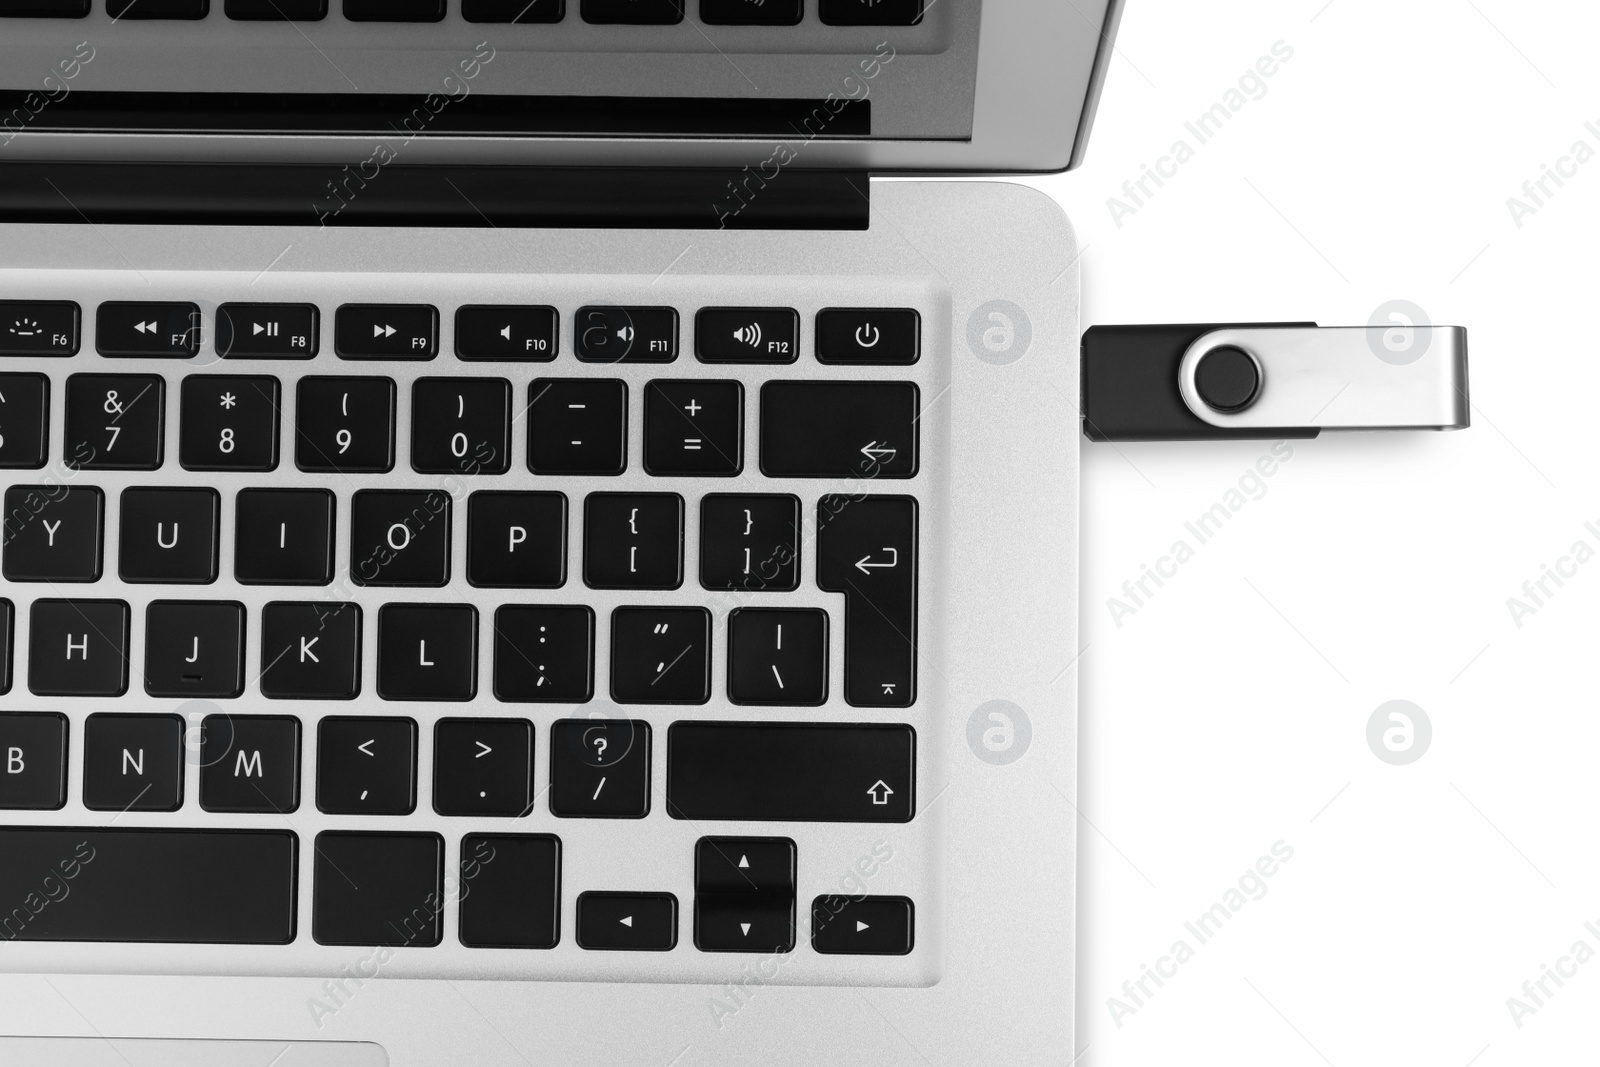 Photo of Modern usb flash drive attached into laptop on white background, top view